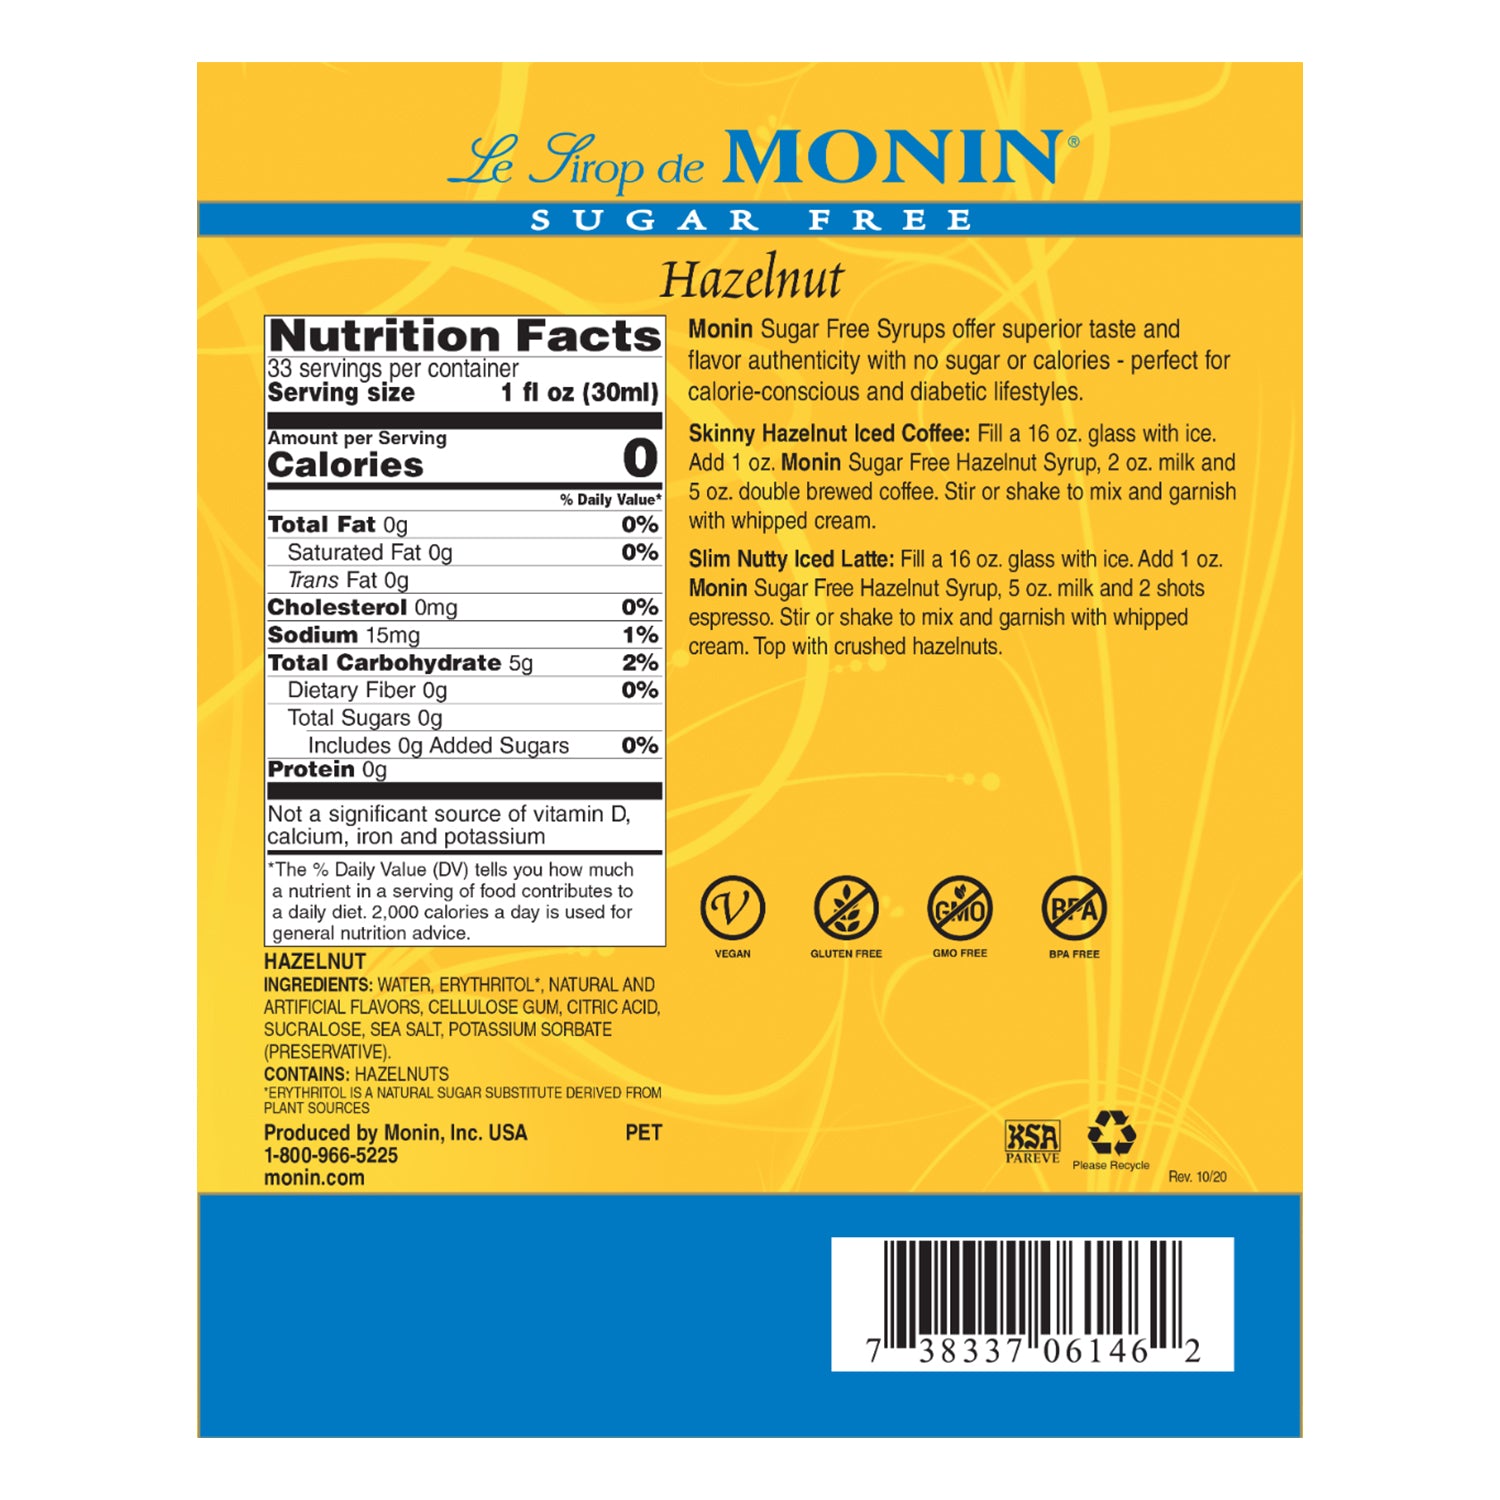 Monin Sugar Free Hazelnut Syrup nutrition facts and directions label